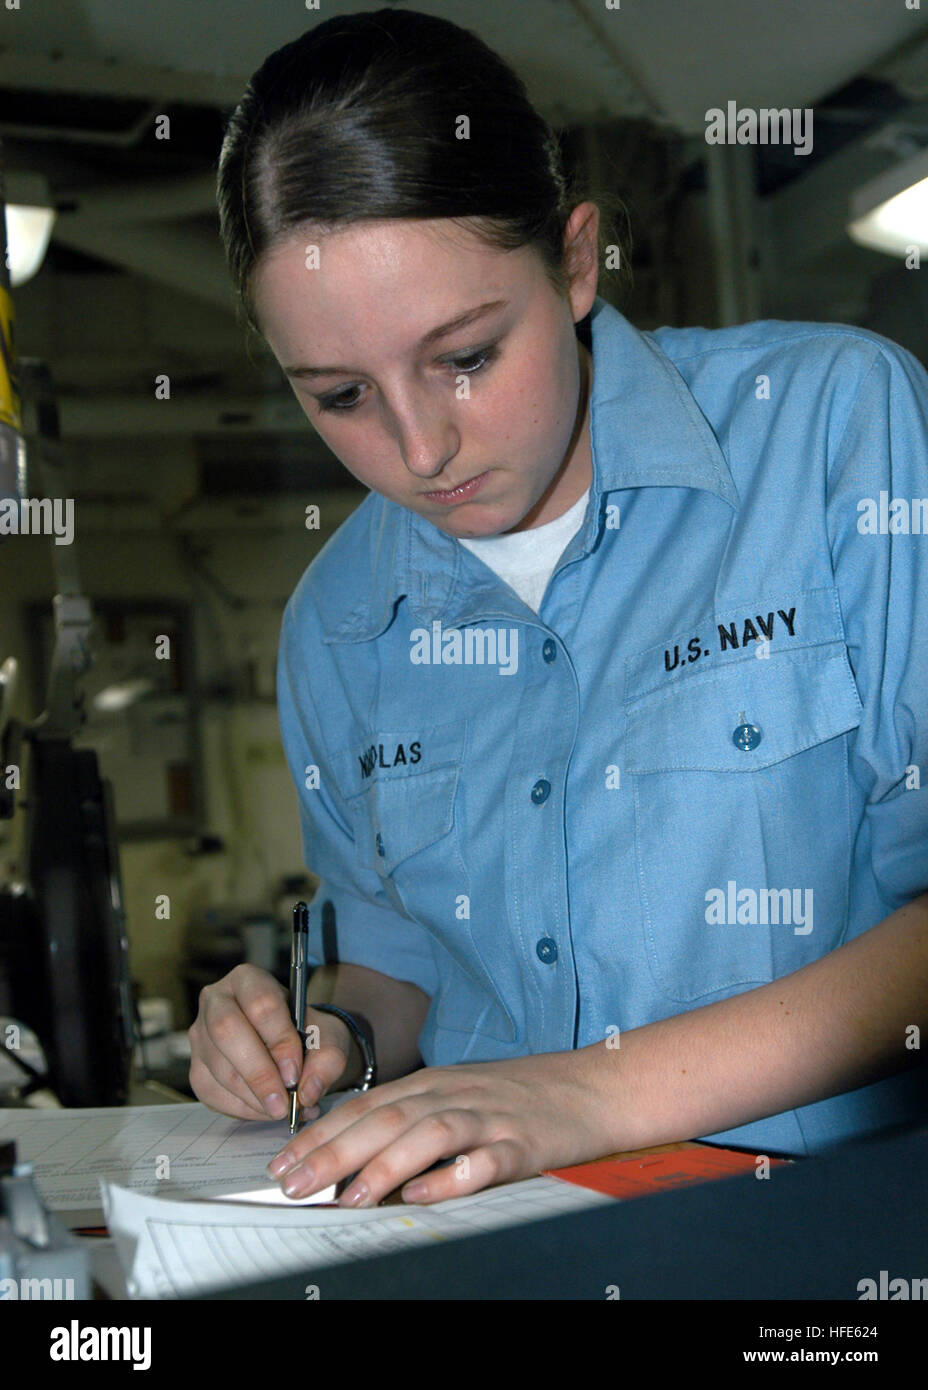 041117-N-5313A-004 Atlantic Ocean (Nov. 16, 2004) - Lithographer Seaman Christen R. Nicholas double checks her work on a Planned Maintenance System job sheet, in the print lab aboard the amphibious assault ship USS Kearsarge (LHD 3). The Kearsarge Expeditionary Strike Group and the 26th Marine Expeditionary Unit (MEU) are conducting initial integrated training in preparation for an upcoming scheduled deployment.  U.S. Navy photo by Photographer's Mate Airman Sarah E. Ard (RELEASED) US Navy 041117-N-5313A-004 Lithographer Seaman Christen R. Nicholas double checks her work on a Planned Maintenan Stock Photo